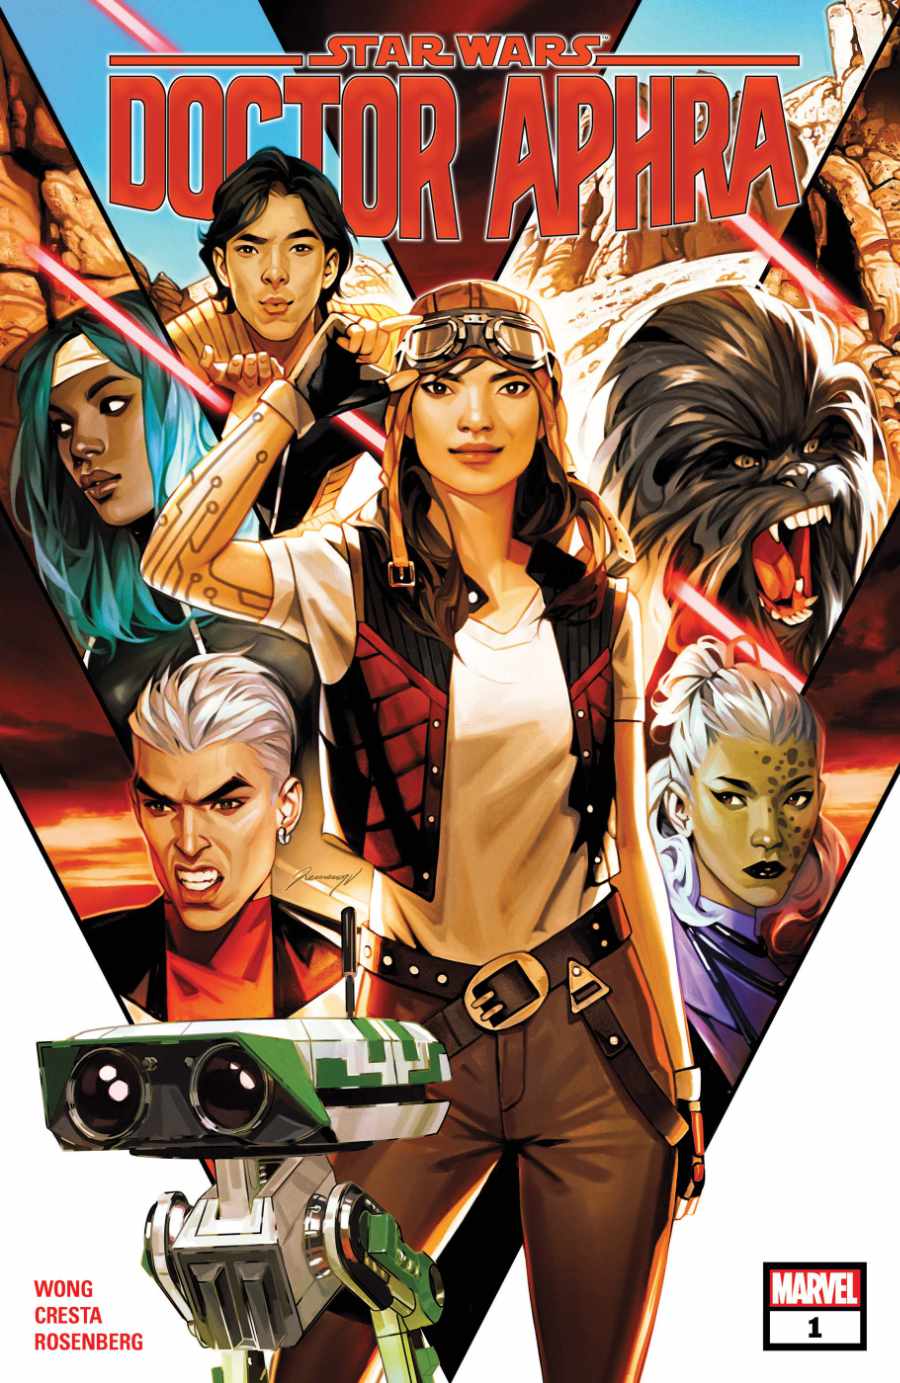 May the 4th Star Wars Day Star Wars: Doctor Aphra